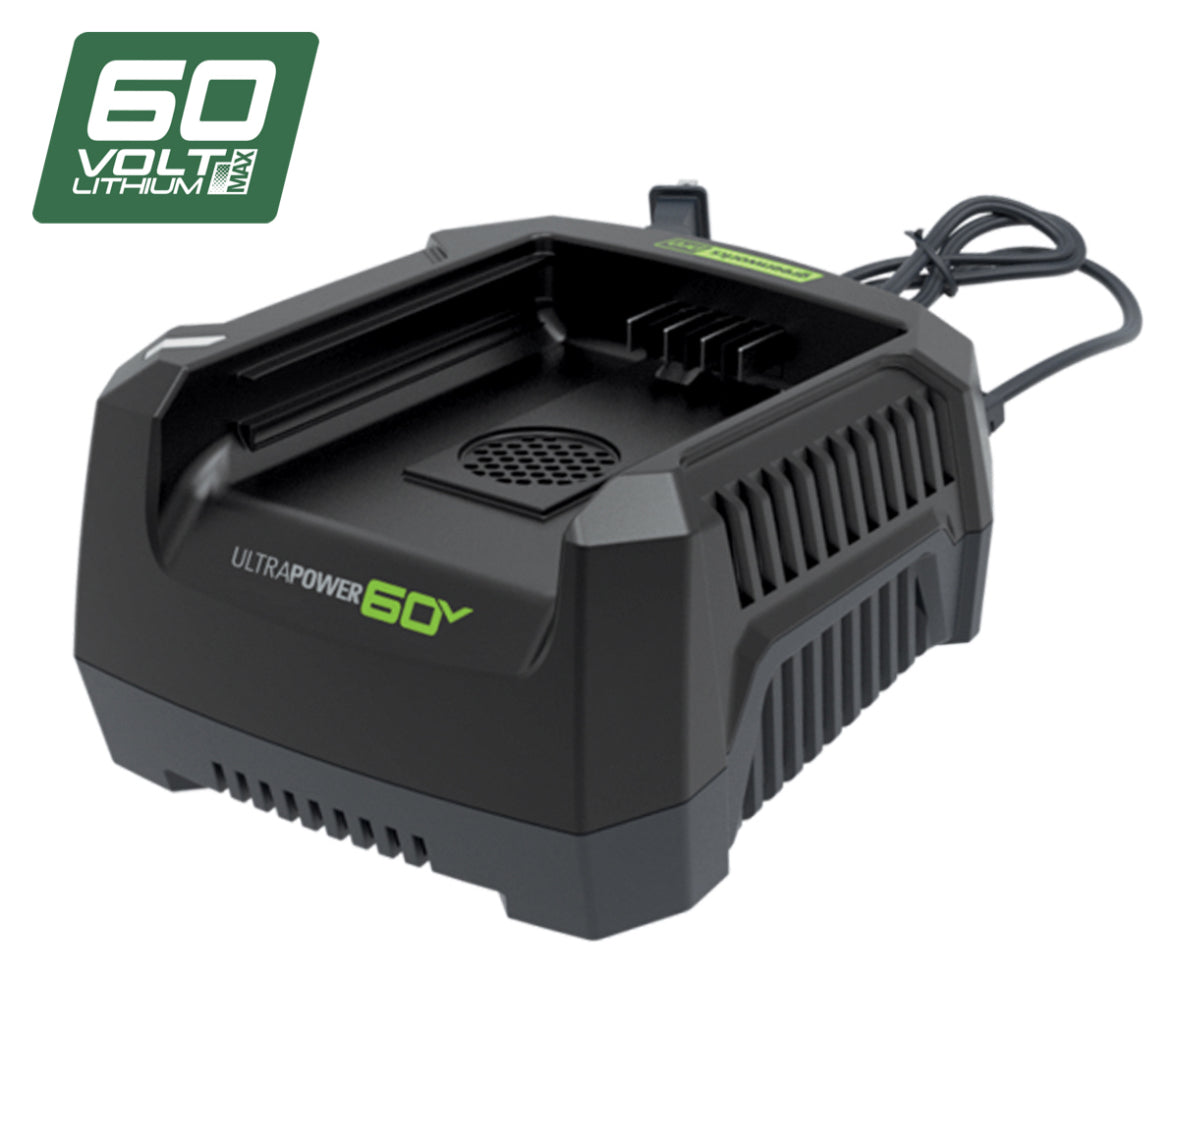 Greenworks 60V 46cm SP Mower + Blower + Multi Tool + Pole Saw/Hedge Trimmer attach 1×4.0Ah Battery + Charger Kit